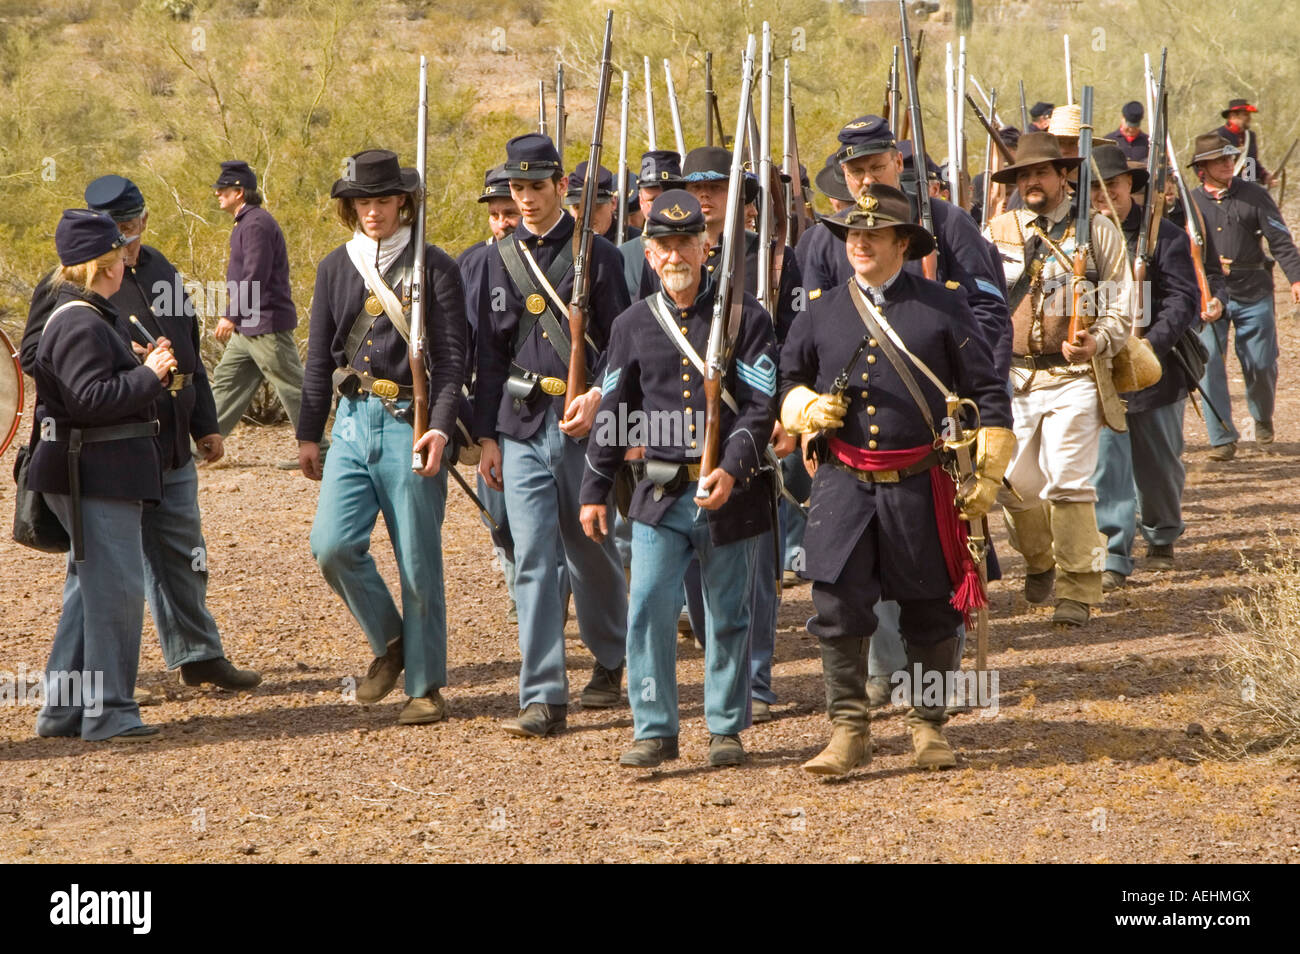 union troops marching from the battlefield after a civil war reenactment at Picacho Peak State Park Arizona March 2007 Stock Photo